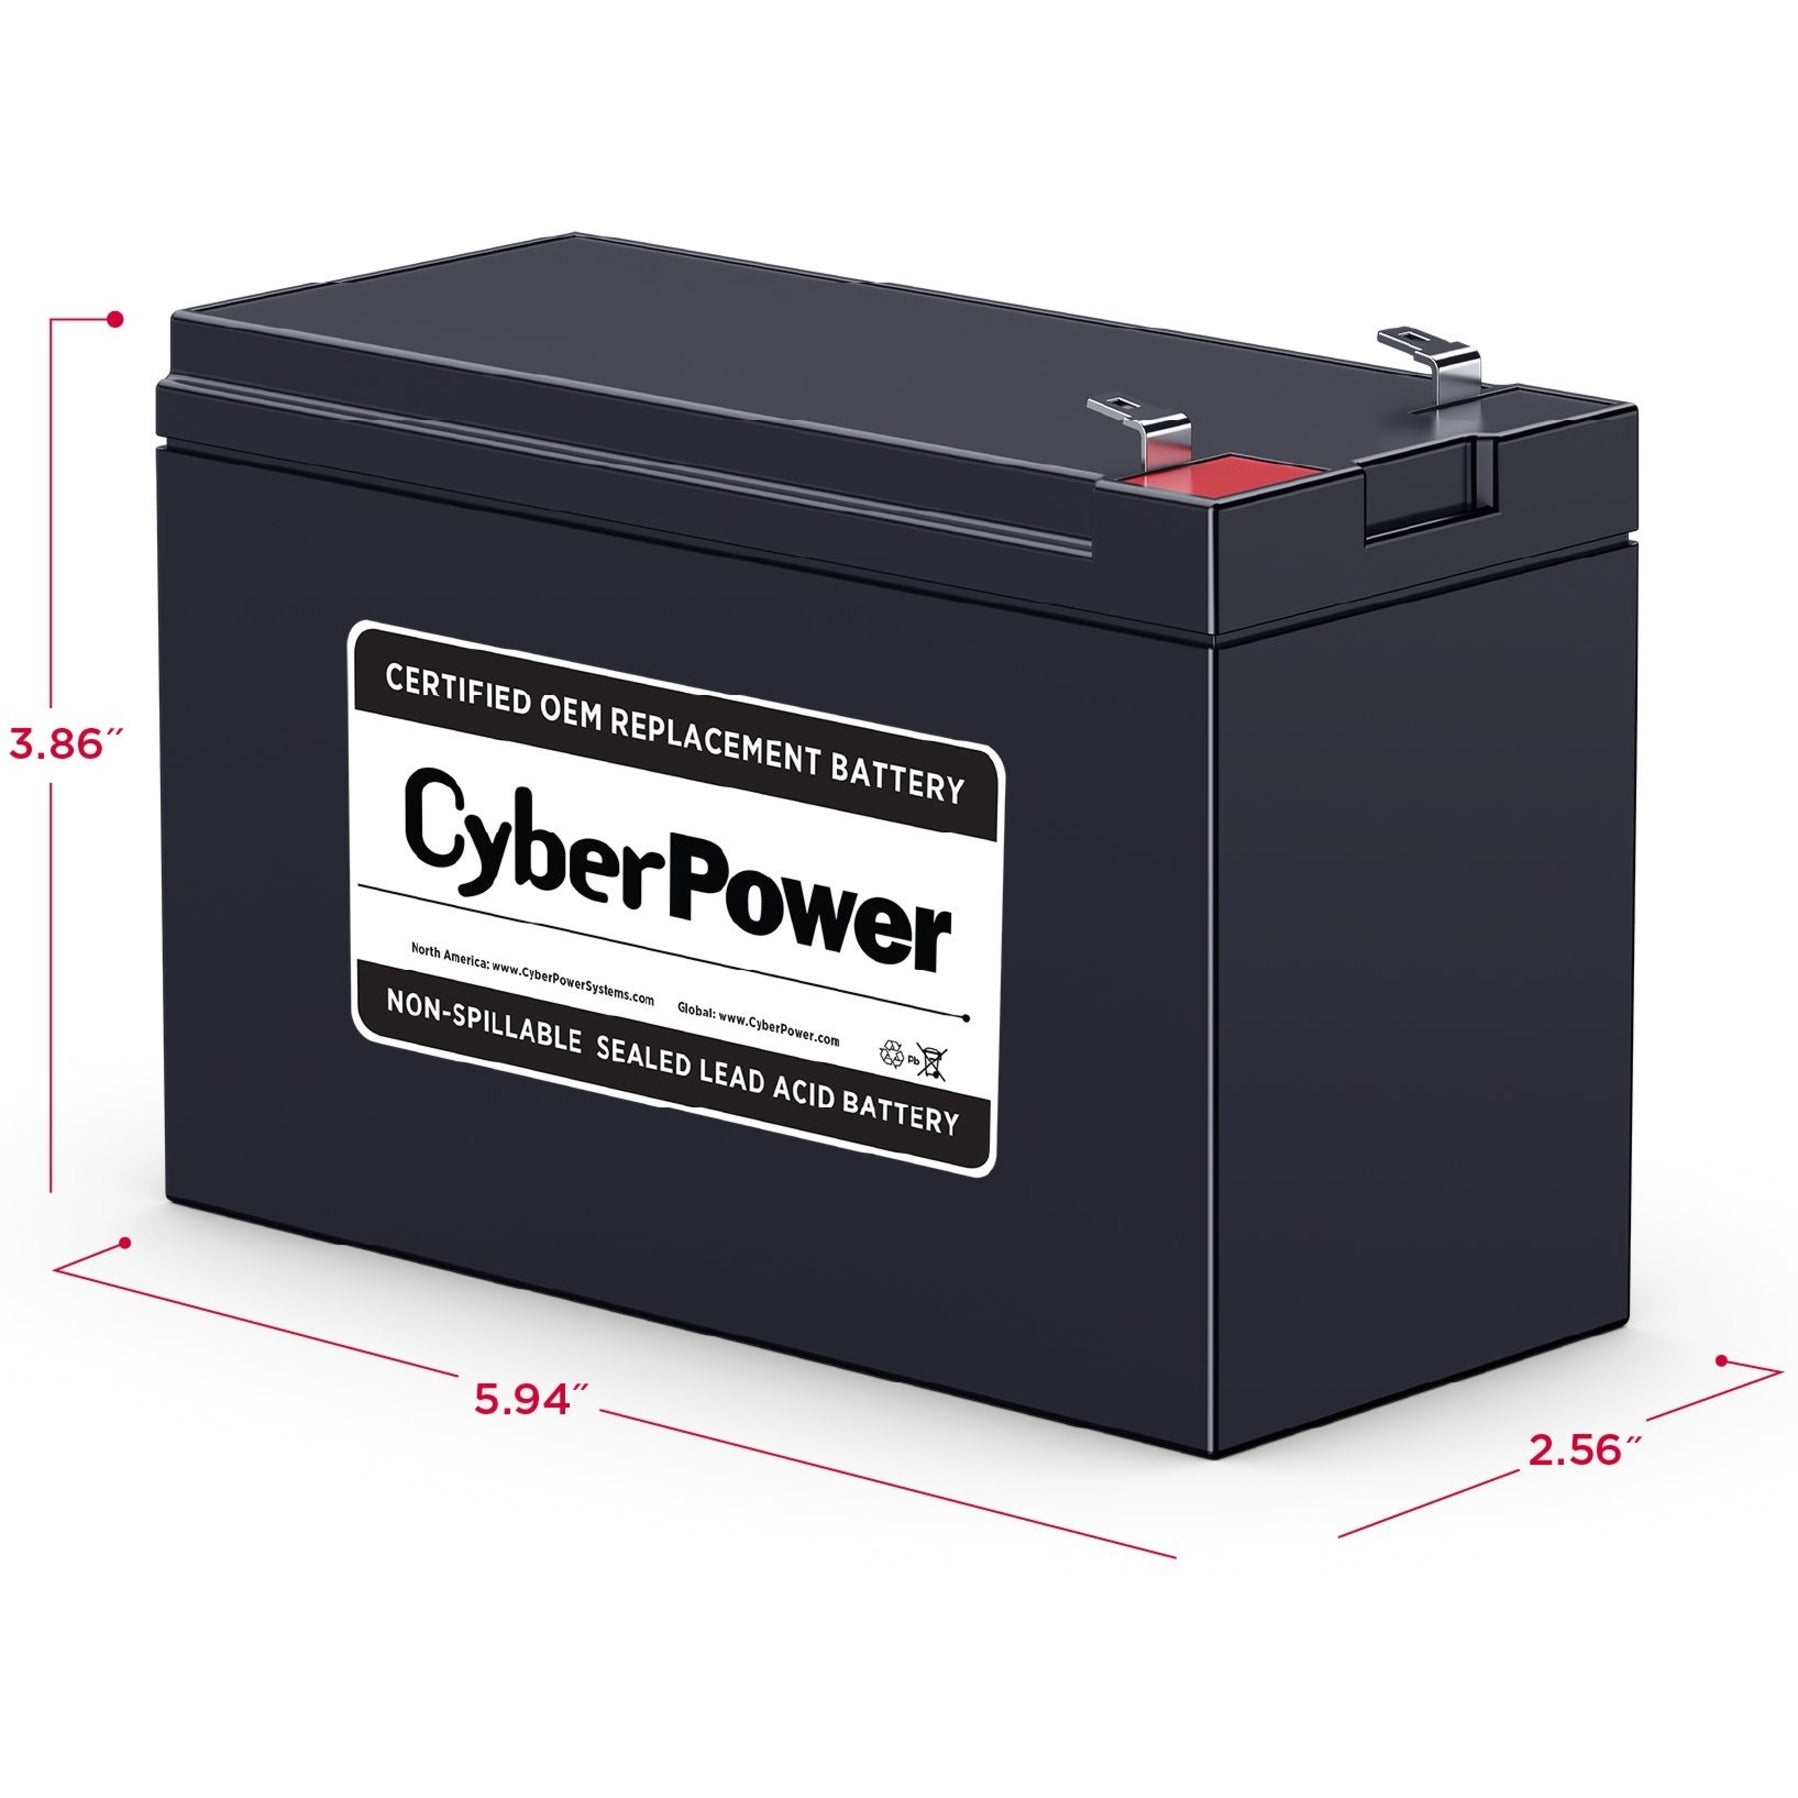 CyberPower RB1280 UPS Replacement Battery Cartridge, 18 Month Warranty, 12V DC, 8000mAh, Lead Acid, Maintenance-free